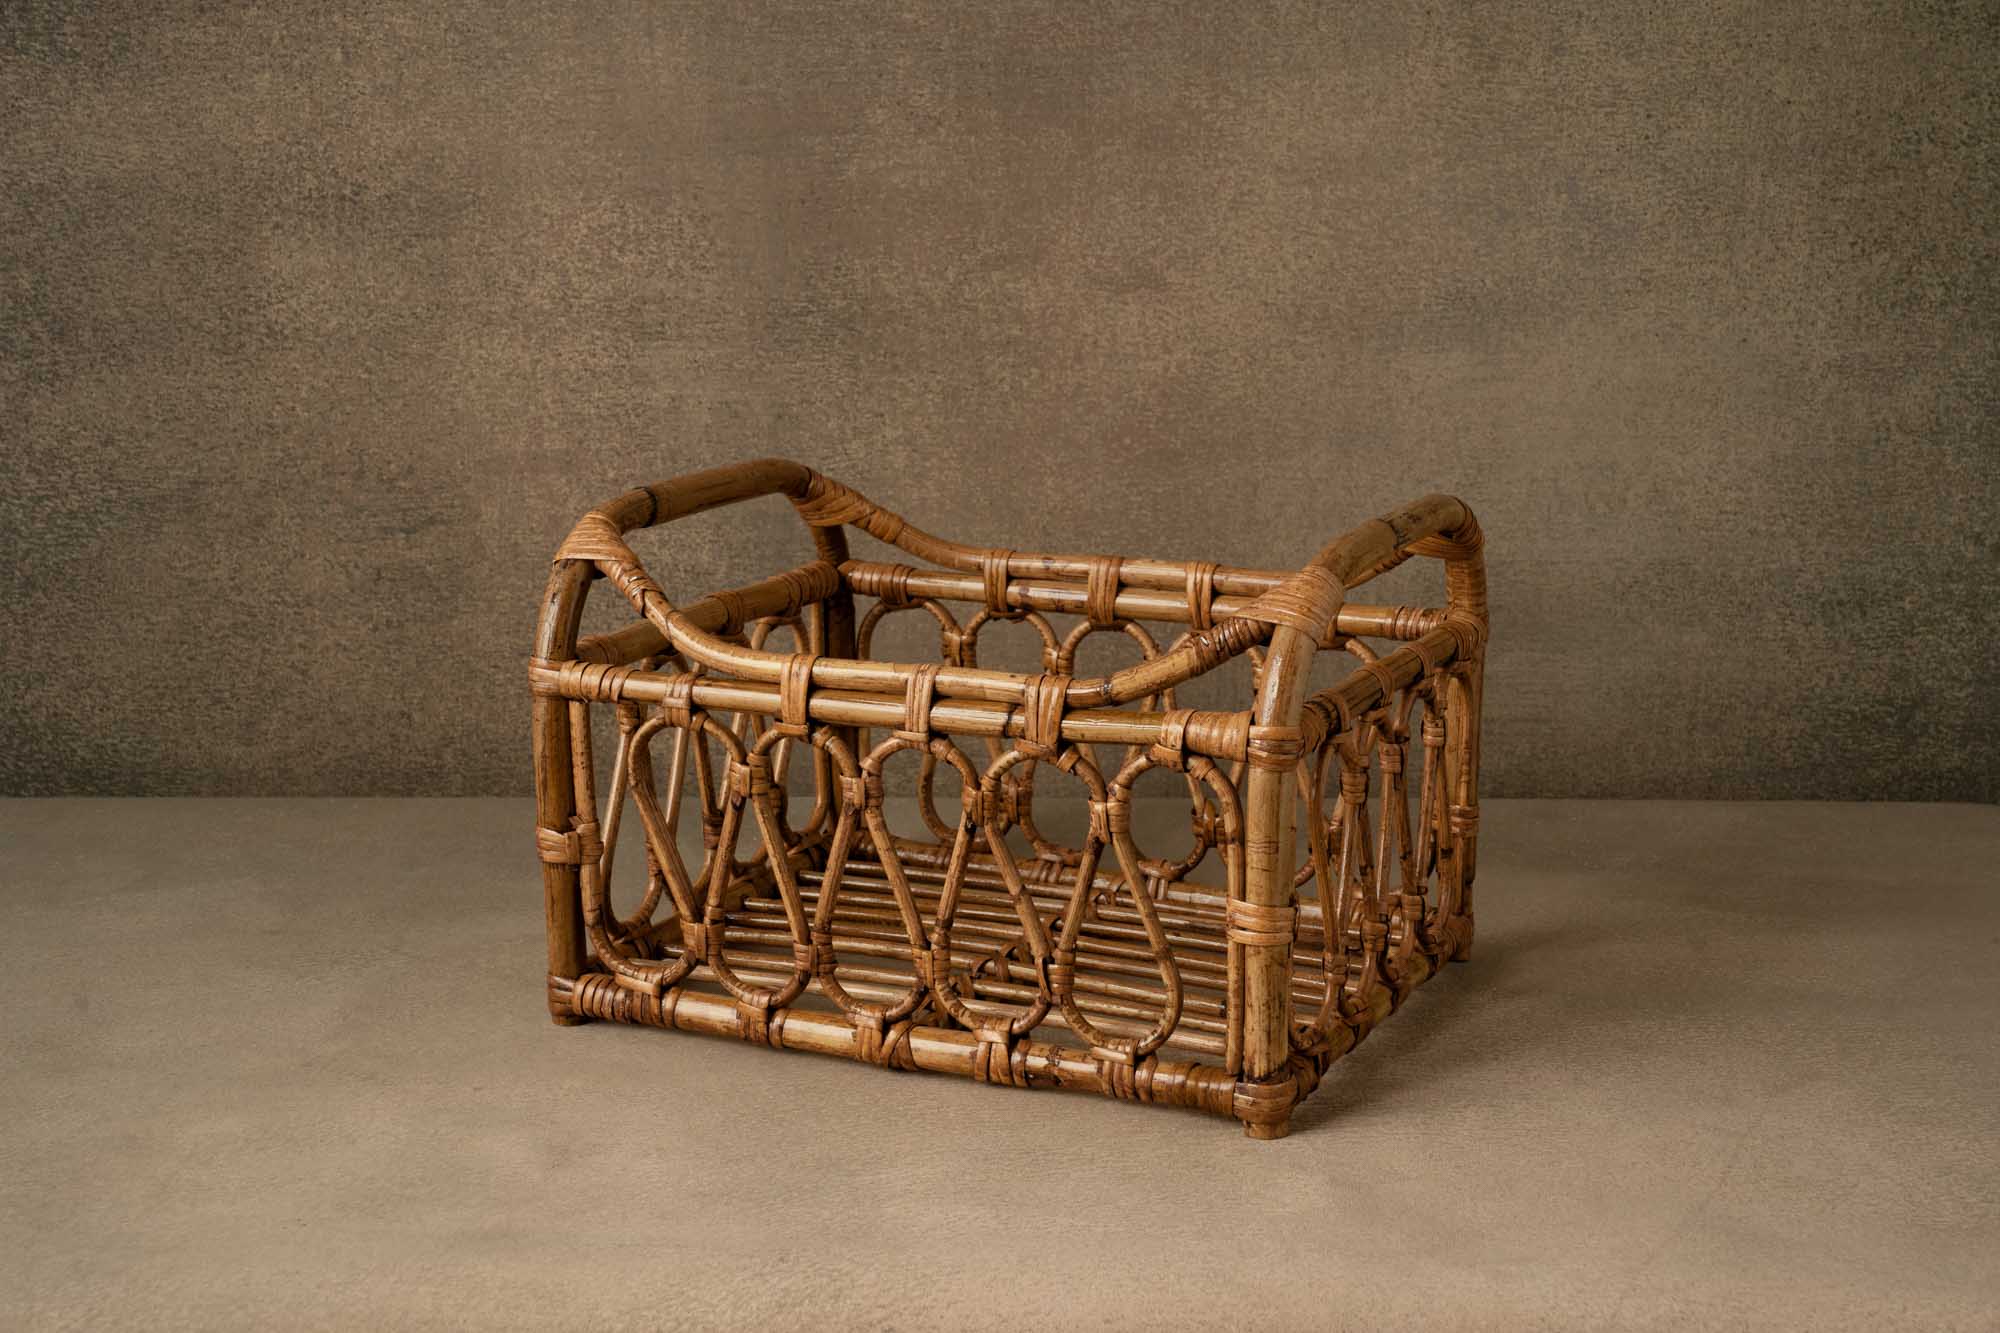 Kate Bamboo Square Woven Basket Newborn Bed Props